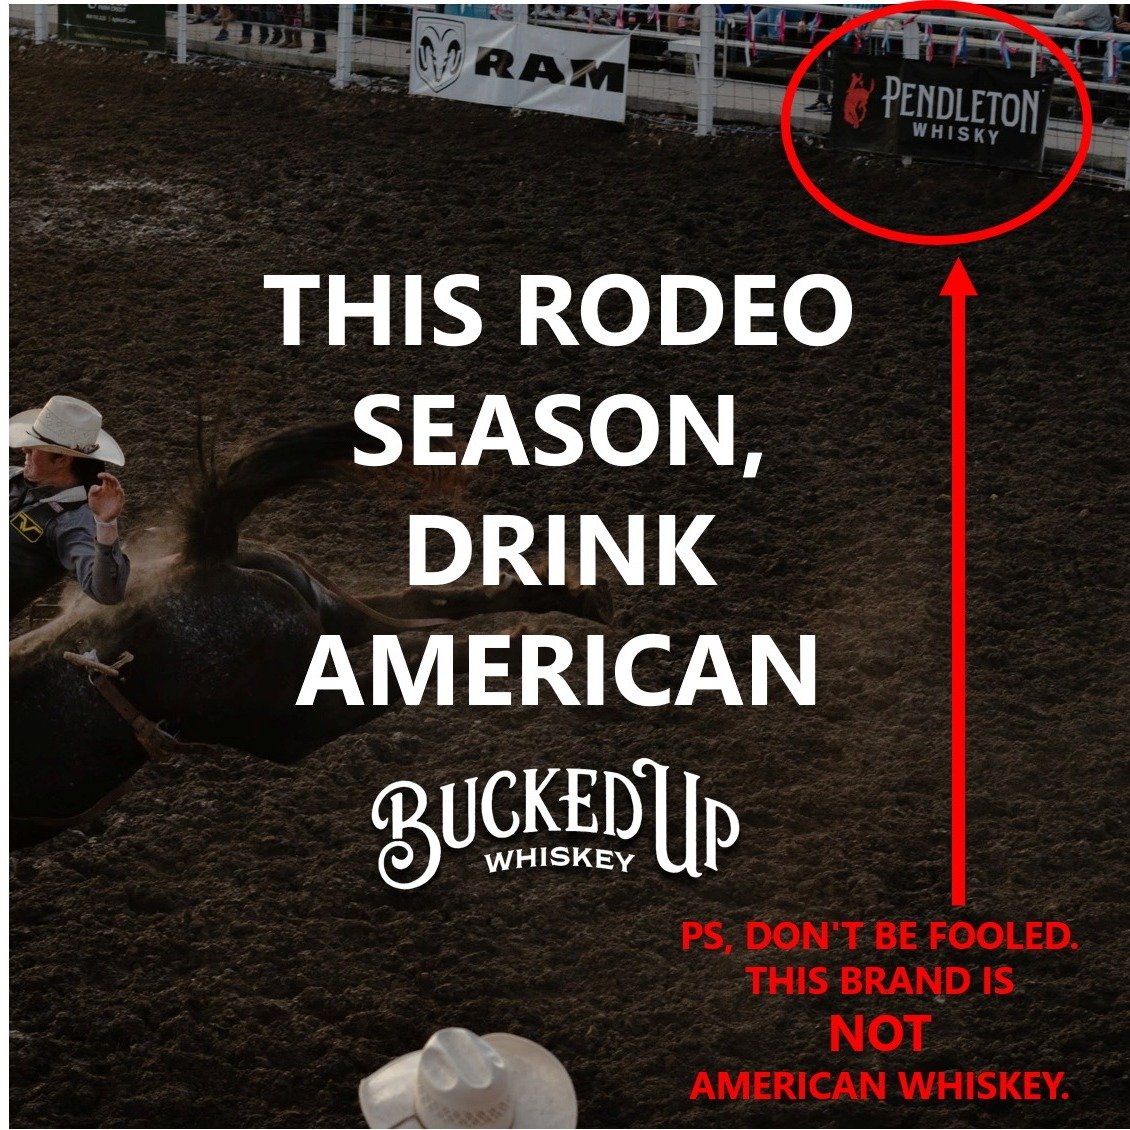 Let&rsquo;s take back American rodeos and choose to drink American whiskey!

#americanmade #BuckedUpWhiteWhiskey #BuckedUpBourbon #BuckedUpWhiskey
@moonshine_bandits